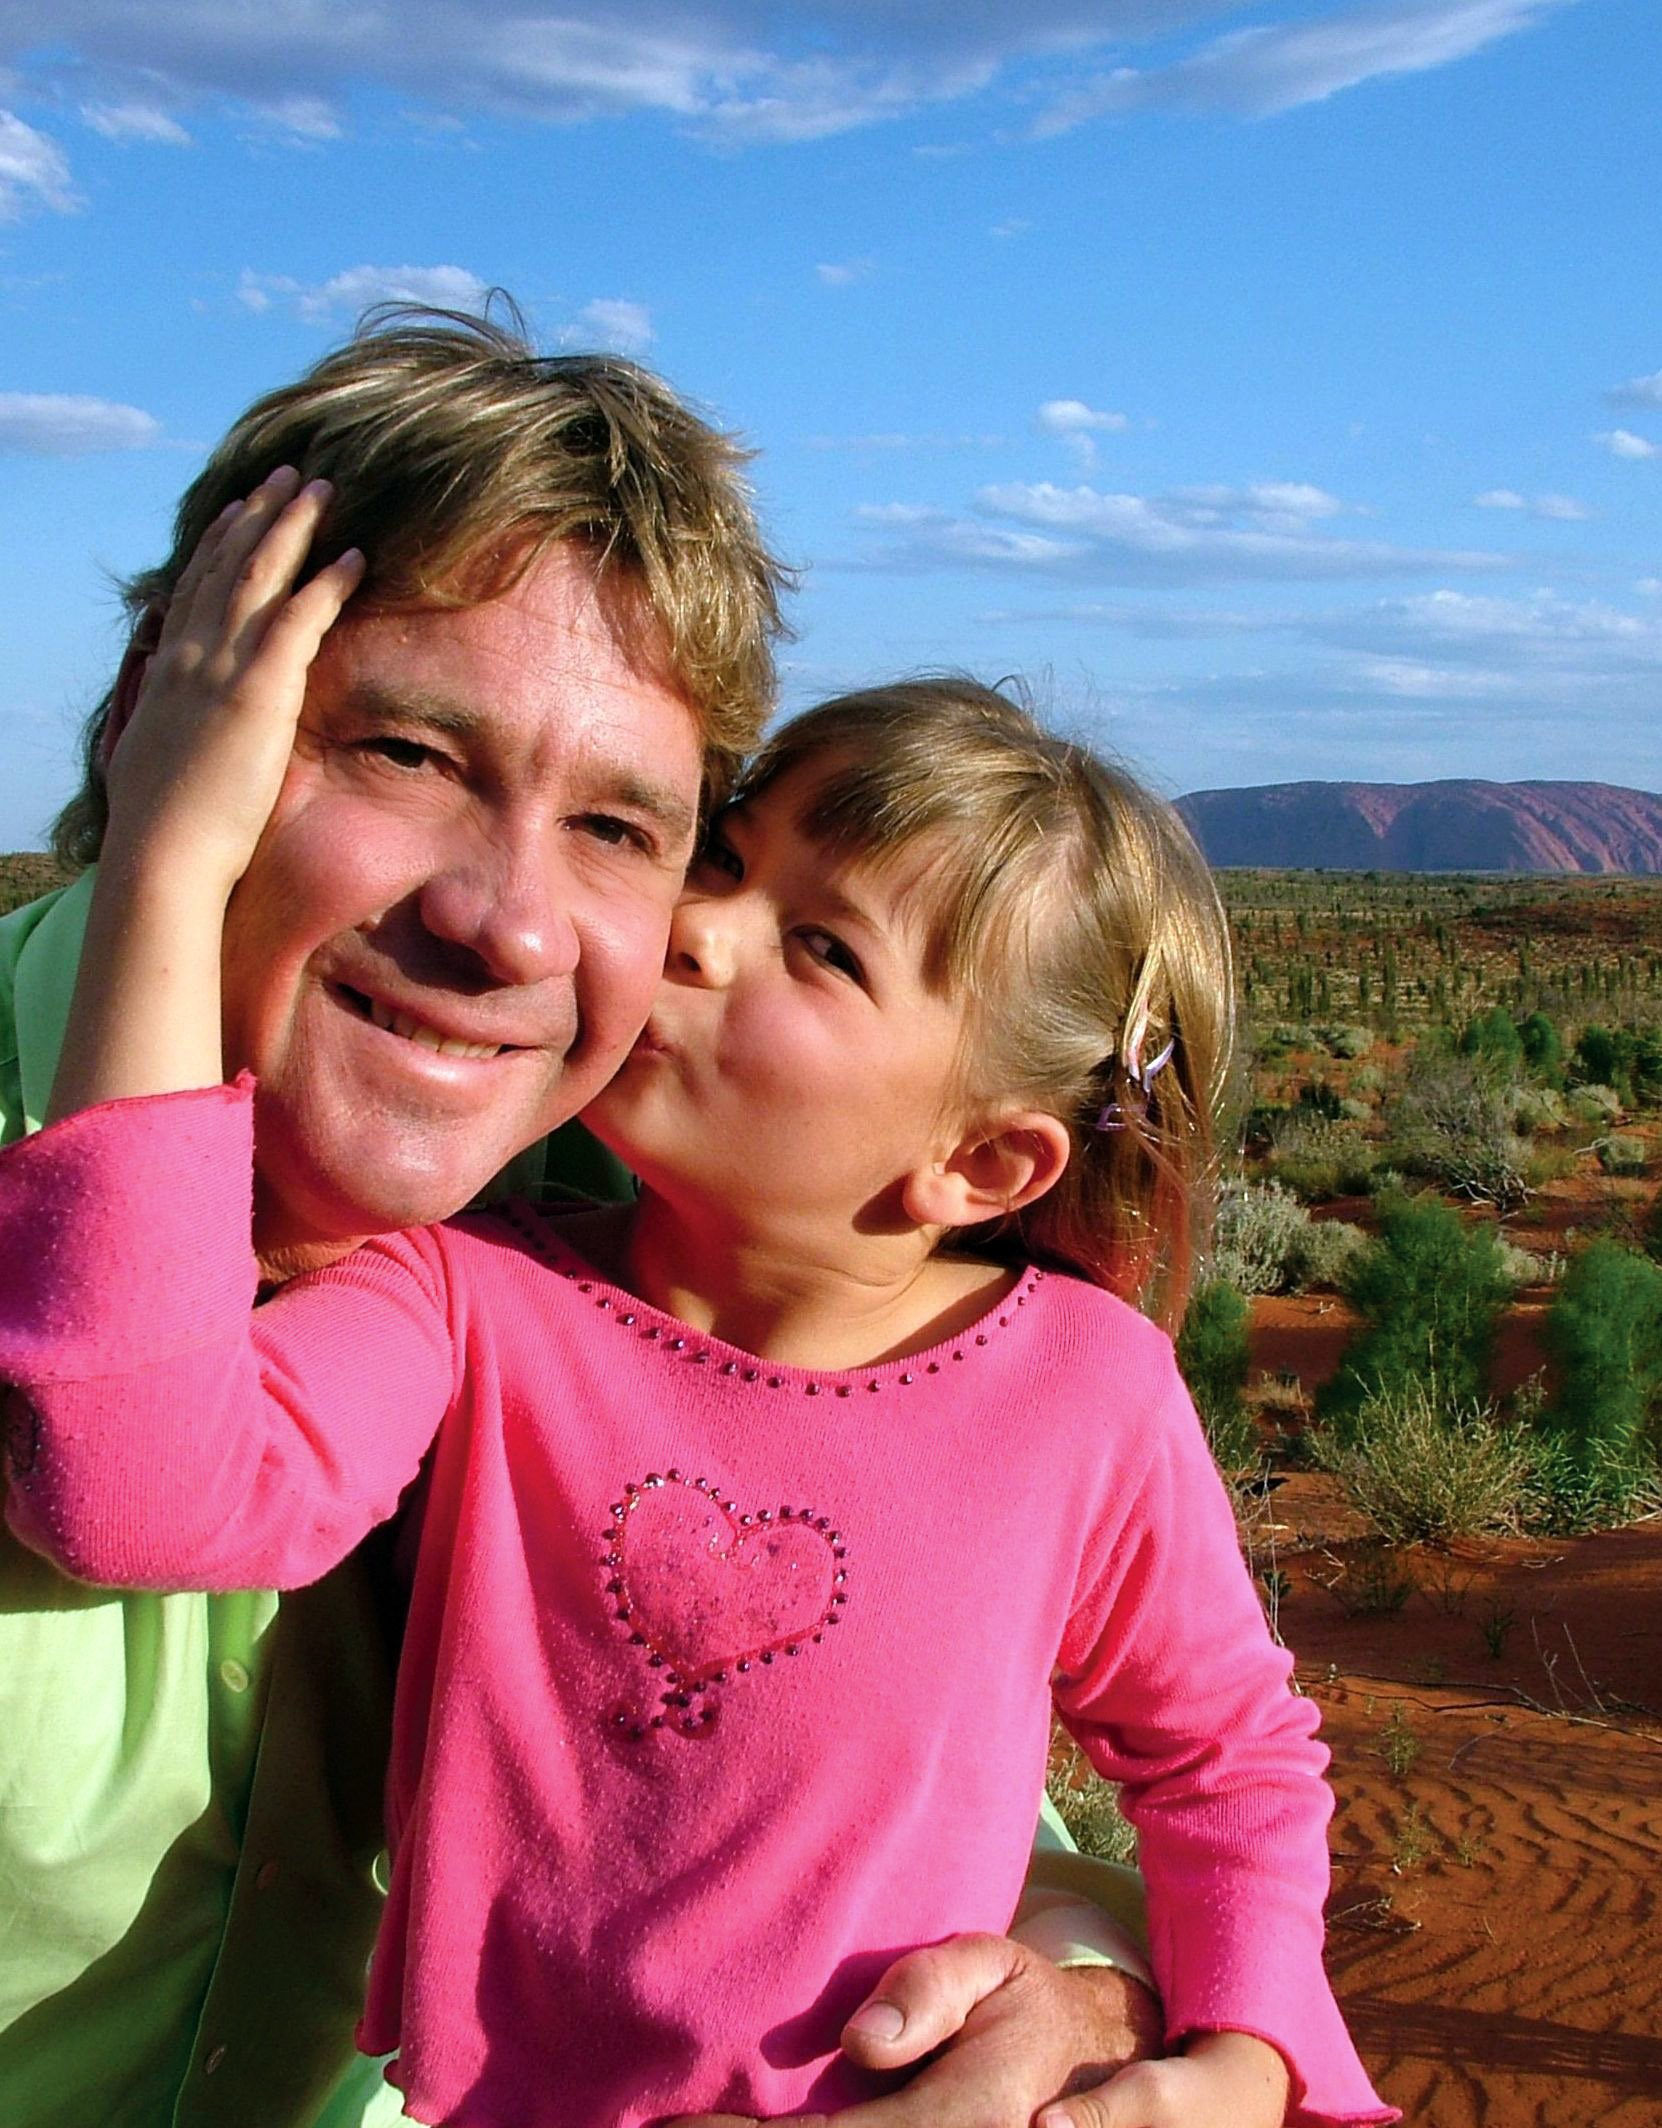 Steve Irwin with his daughter Bindi in Australia 2006. | Source: Getty Images